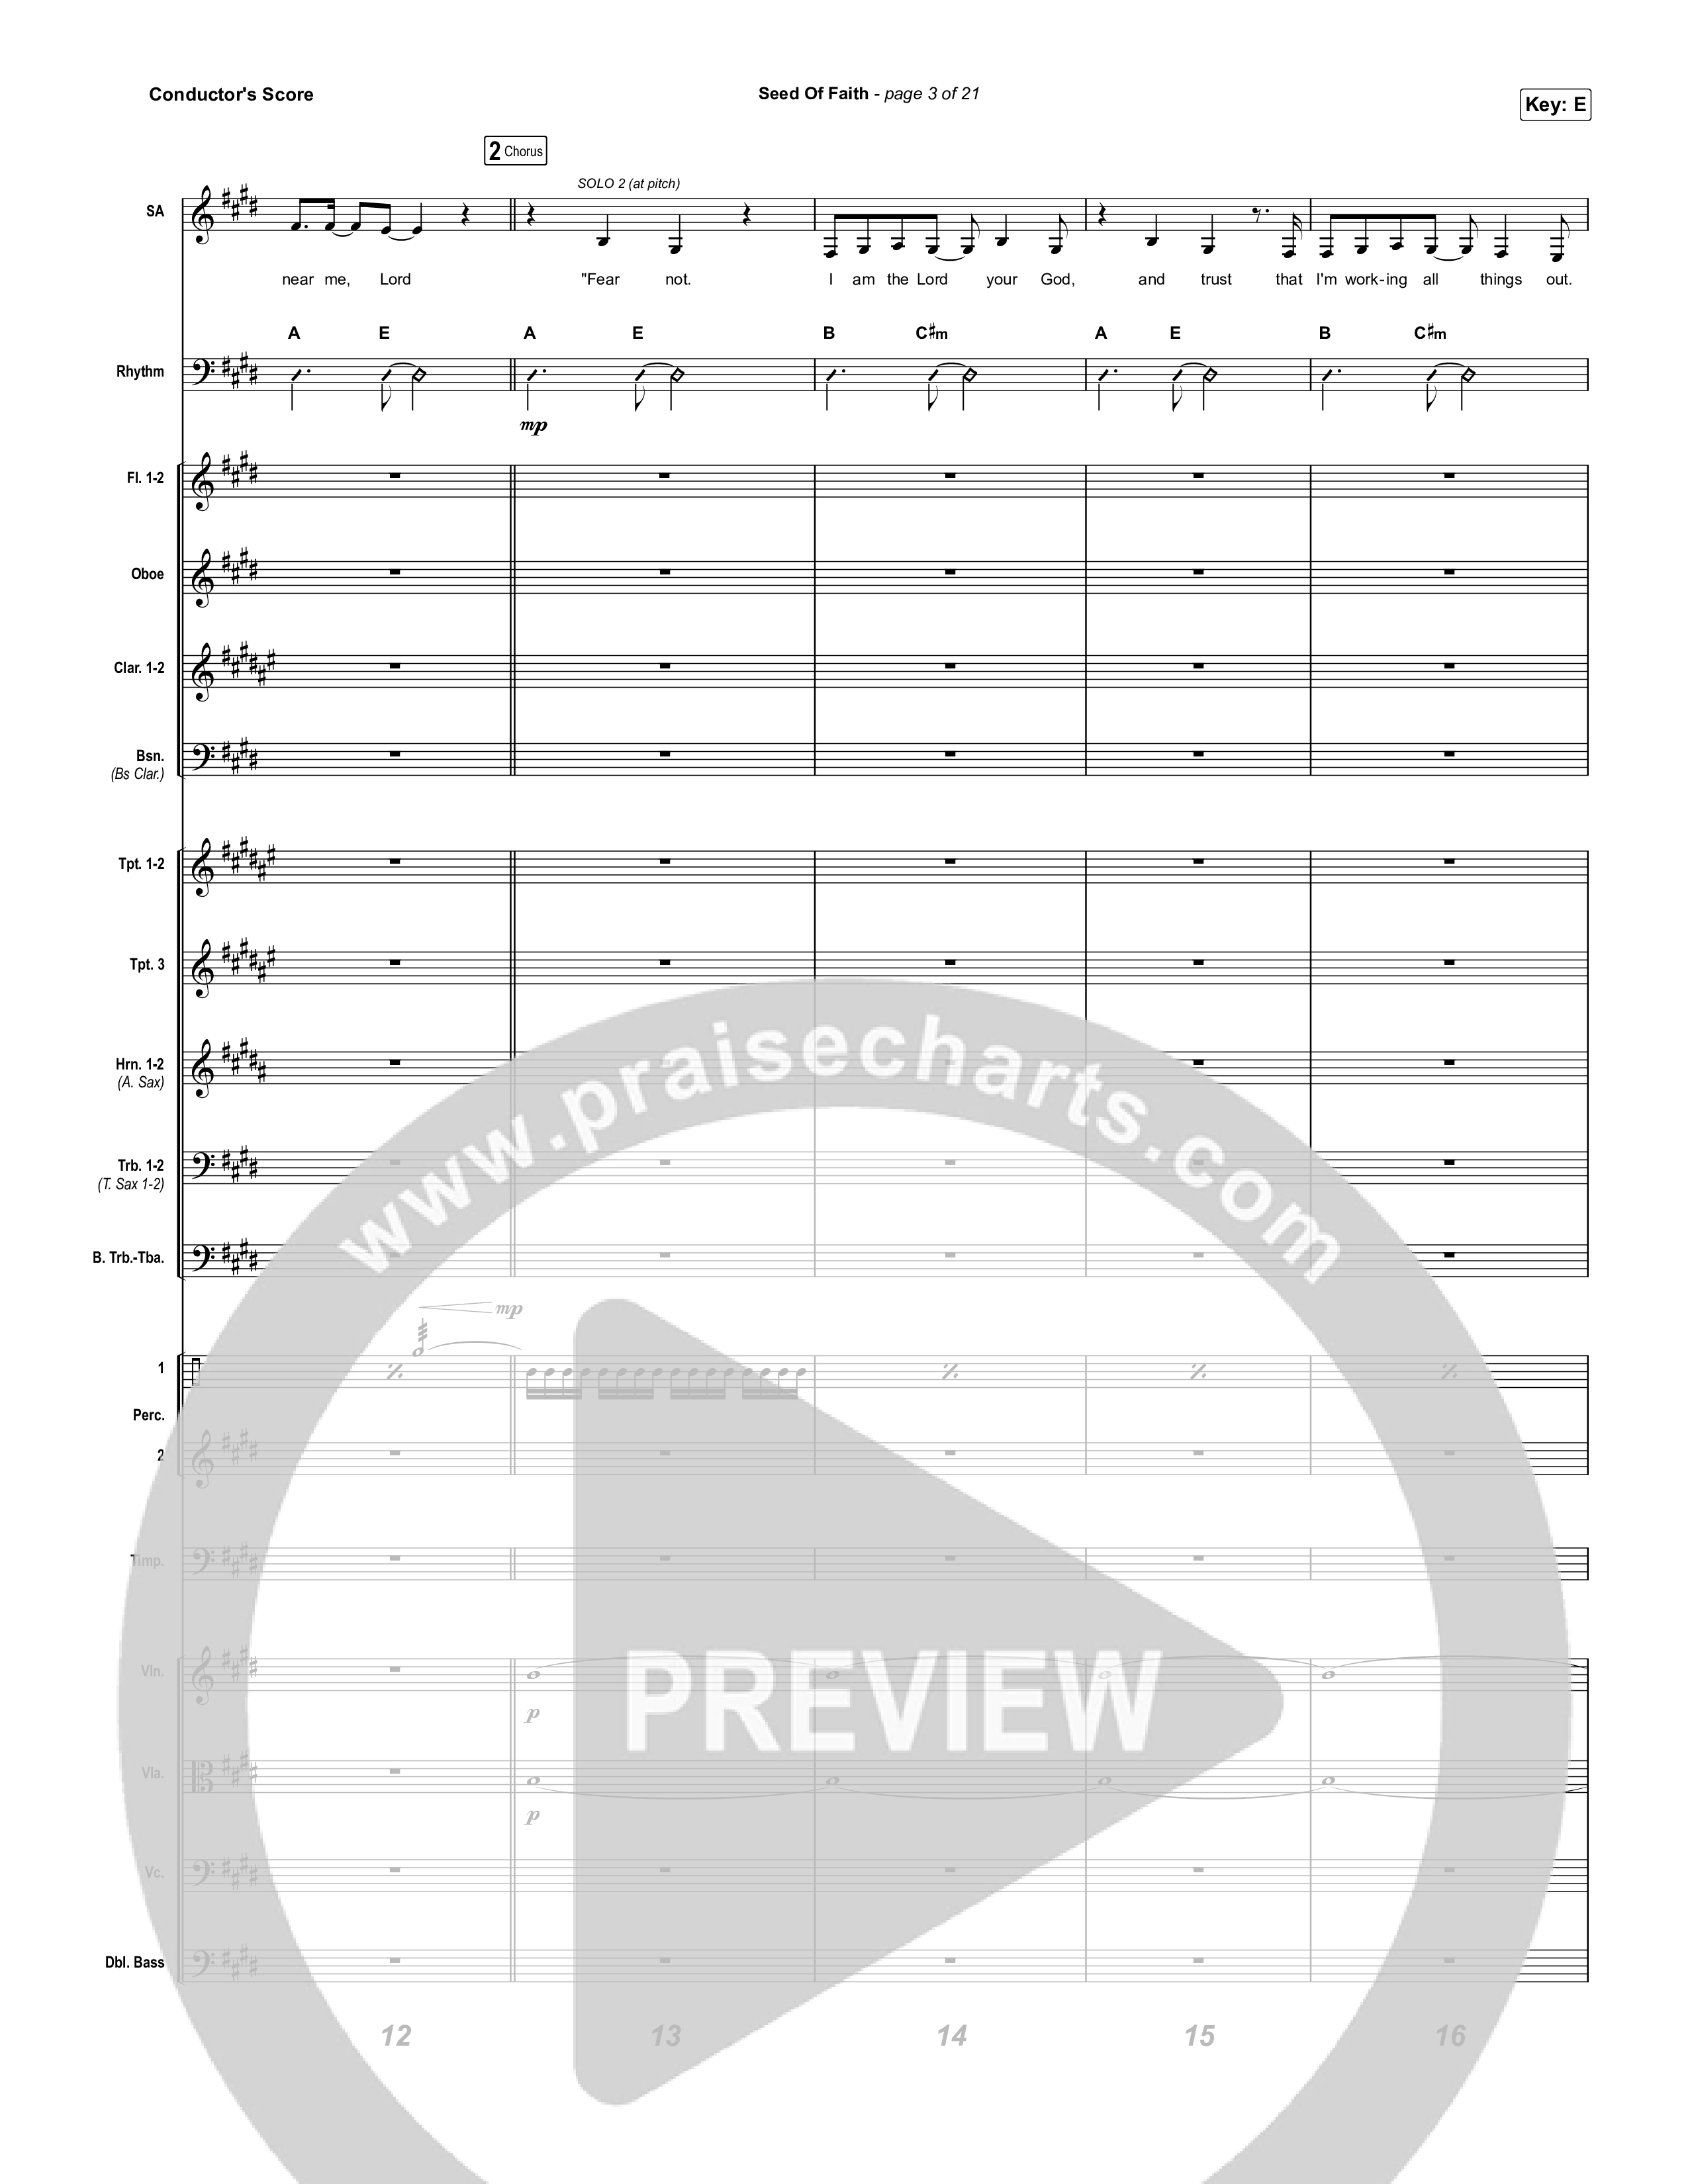 Seed Of Faith Conductor's Score (Charity Gayle)